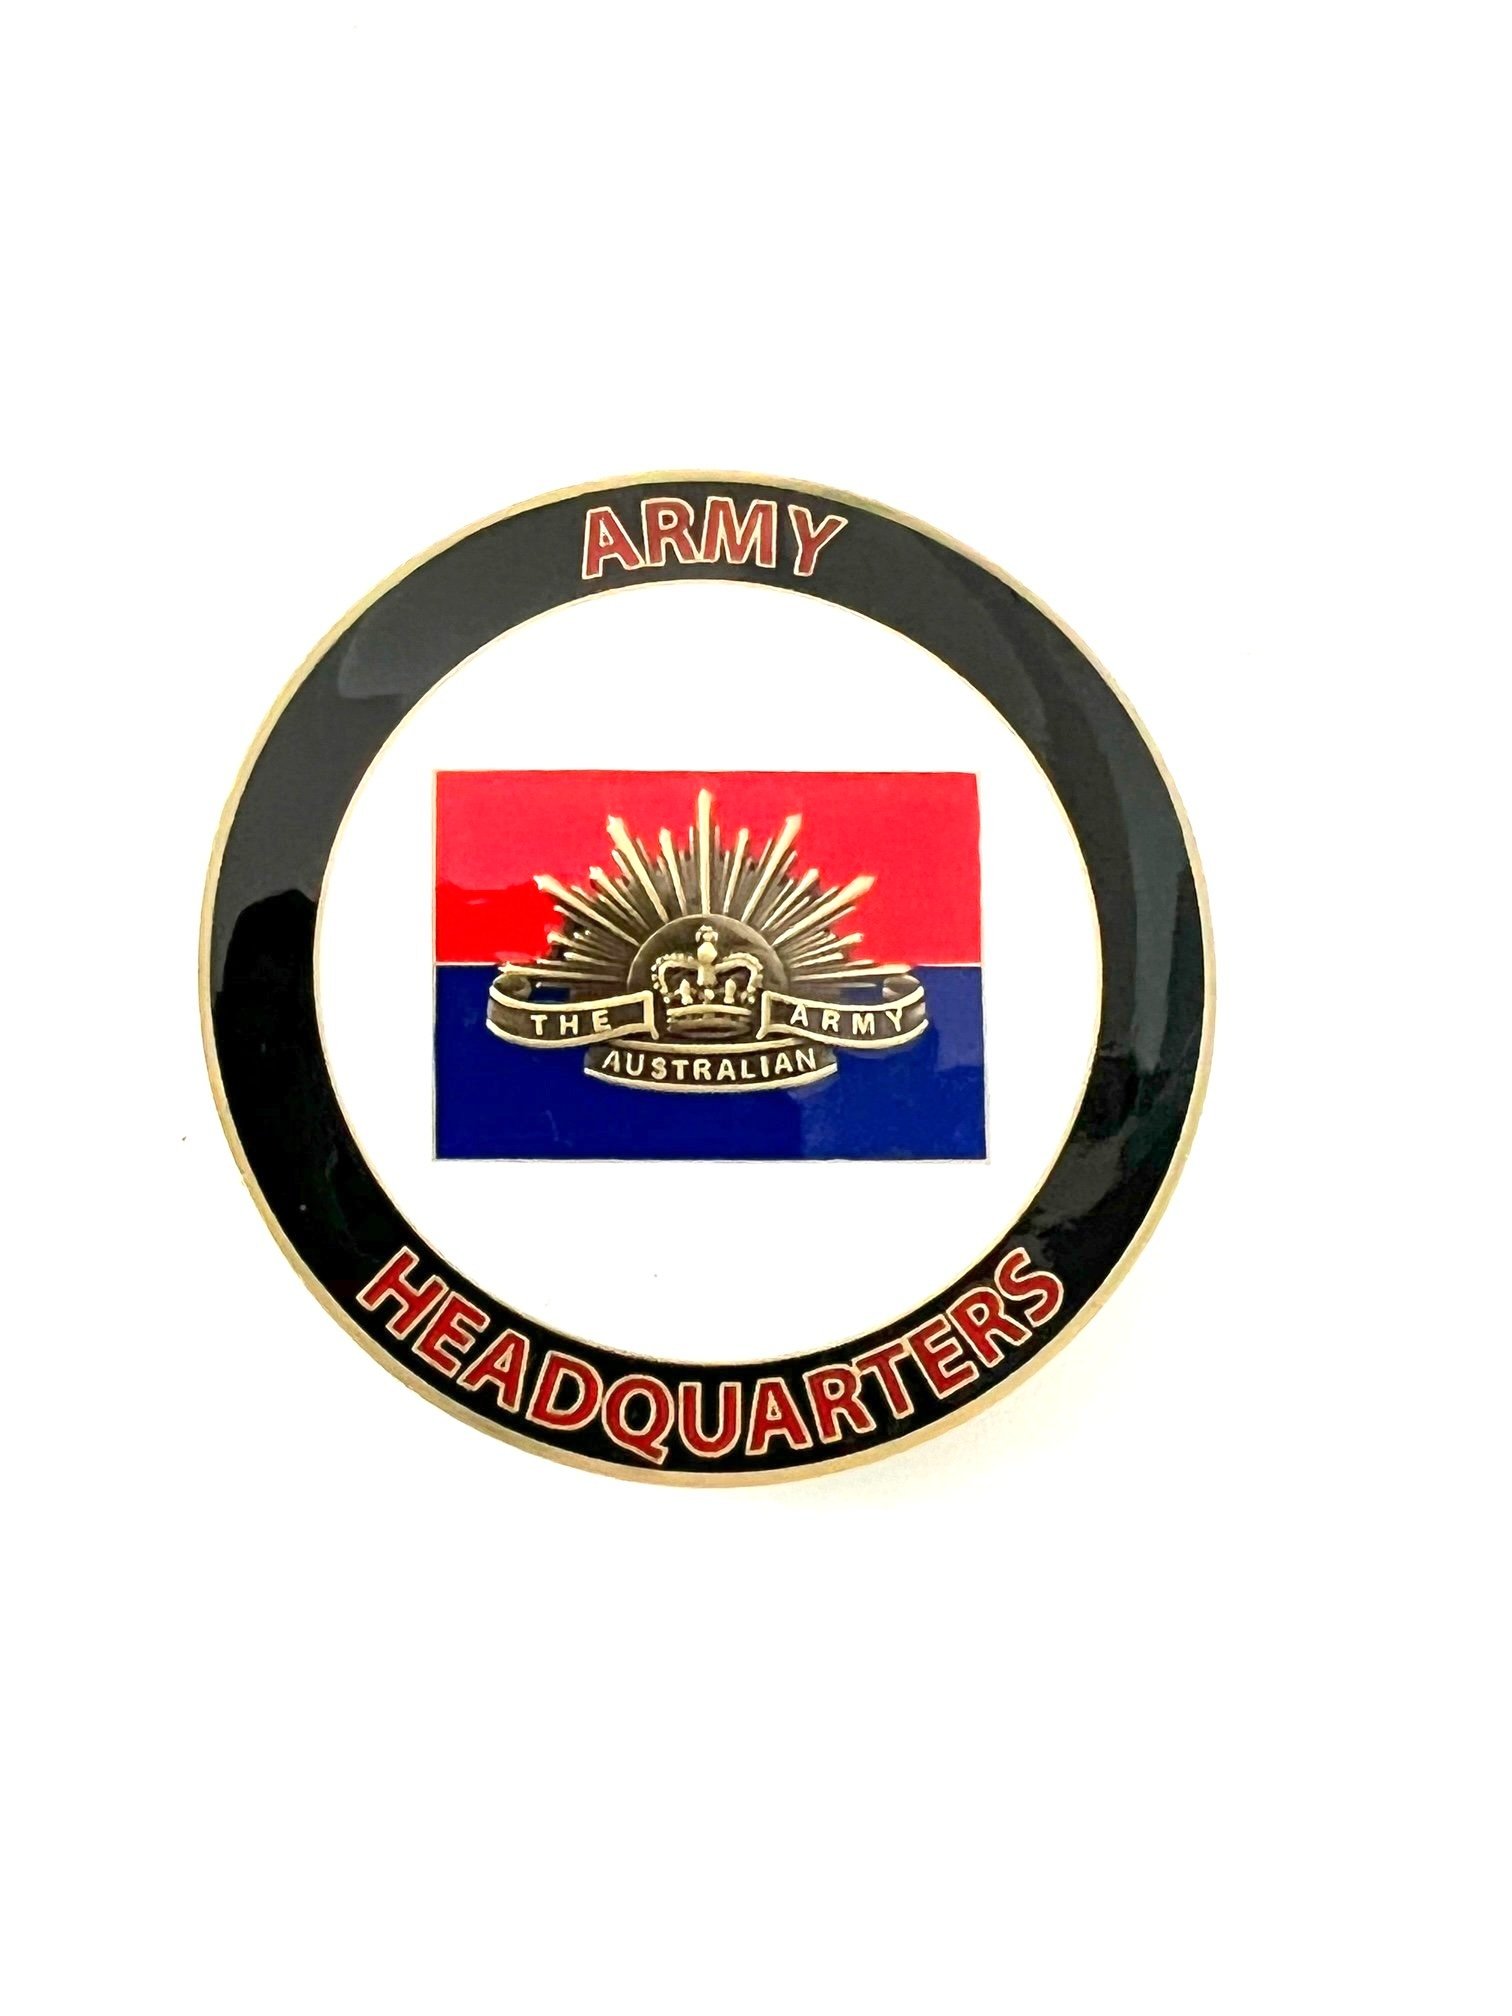 Directorate of Army Health - Army Headquarters - Back